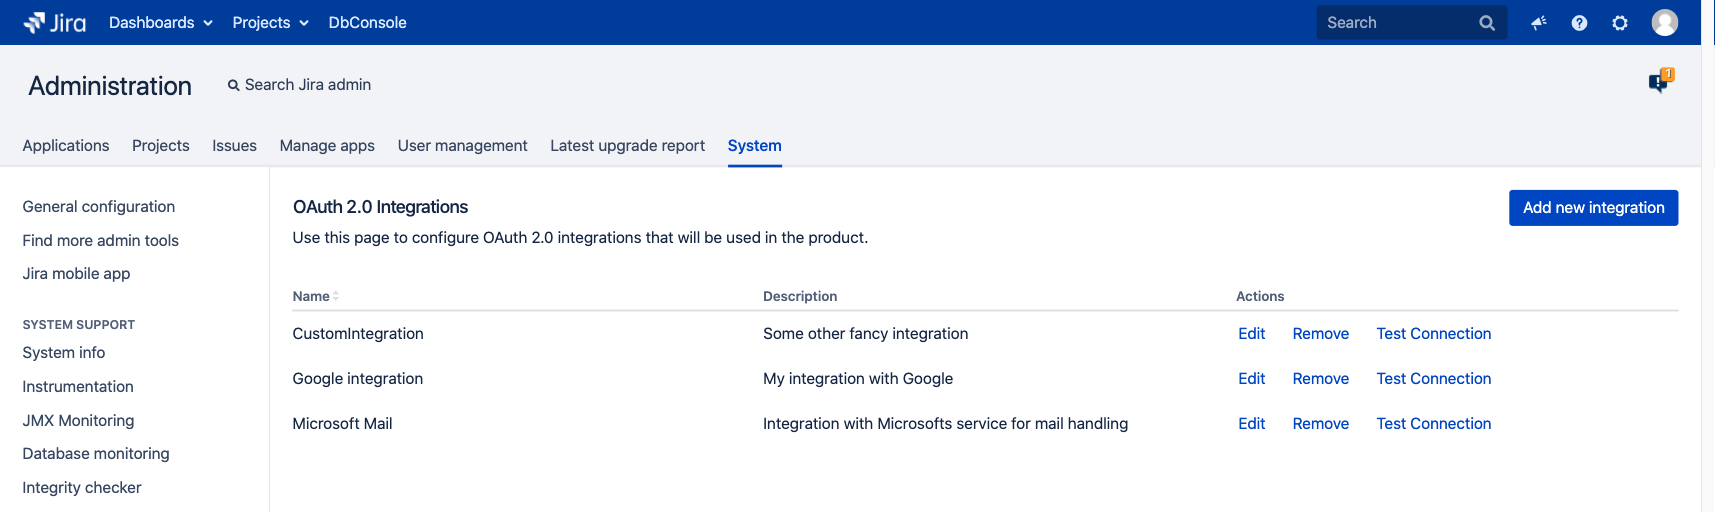 OAuth 2.0 integrations page in the Jira administration console.